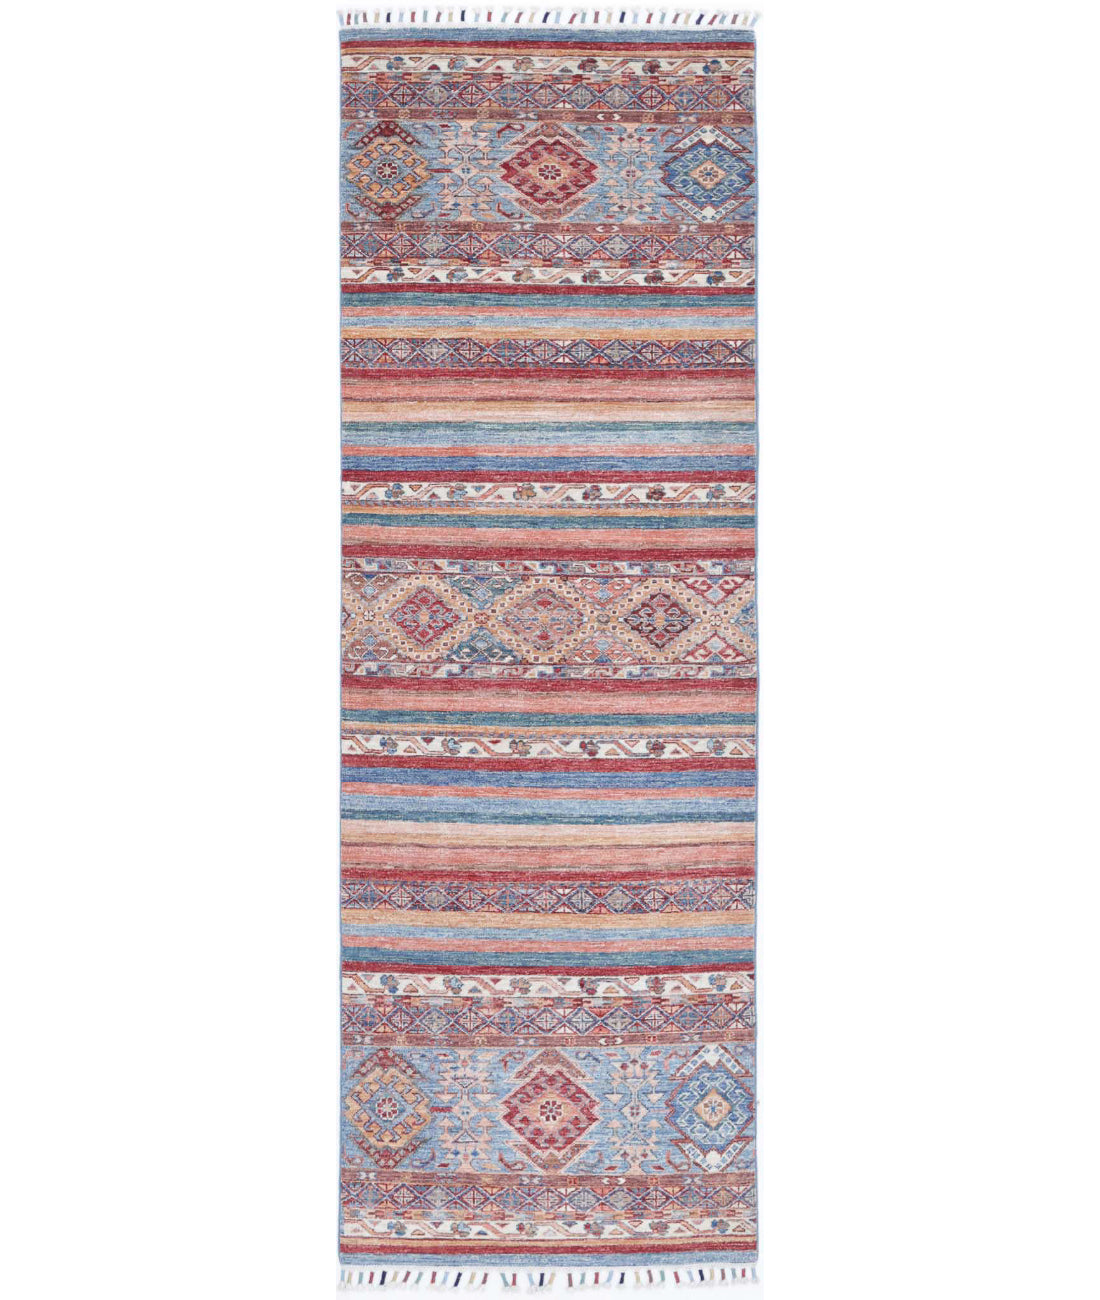 Hand Knotted Khurjeen Wool Rug - 2&#39;6&#39;&#39; x 8&#39;2&#39;&#39; 2&#39;6&#39;&#39; x 8&#39;2&#39;&#39; (75 X 245) / Multi / Multi